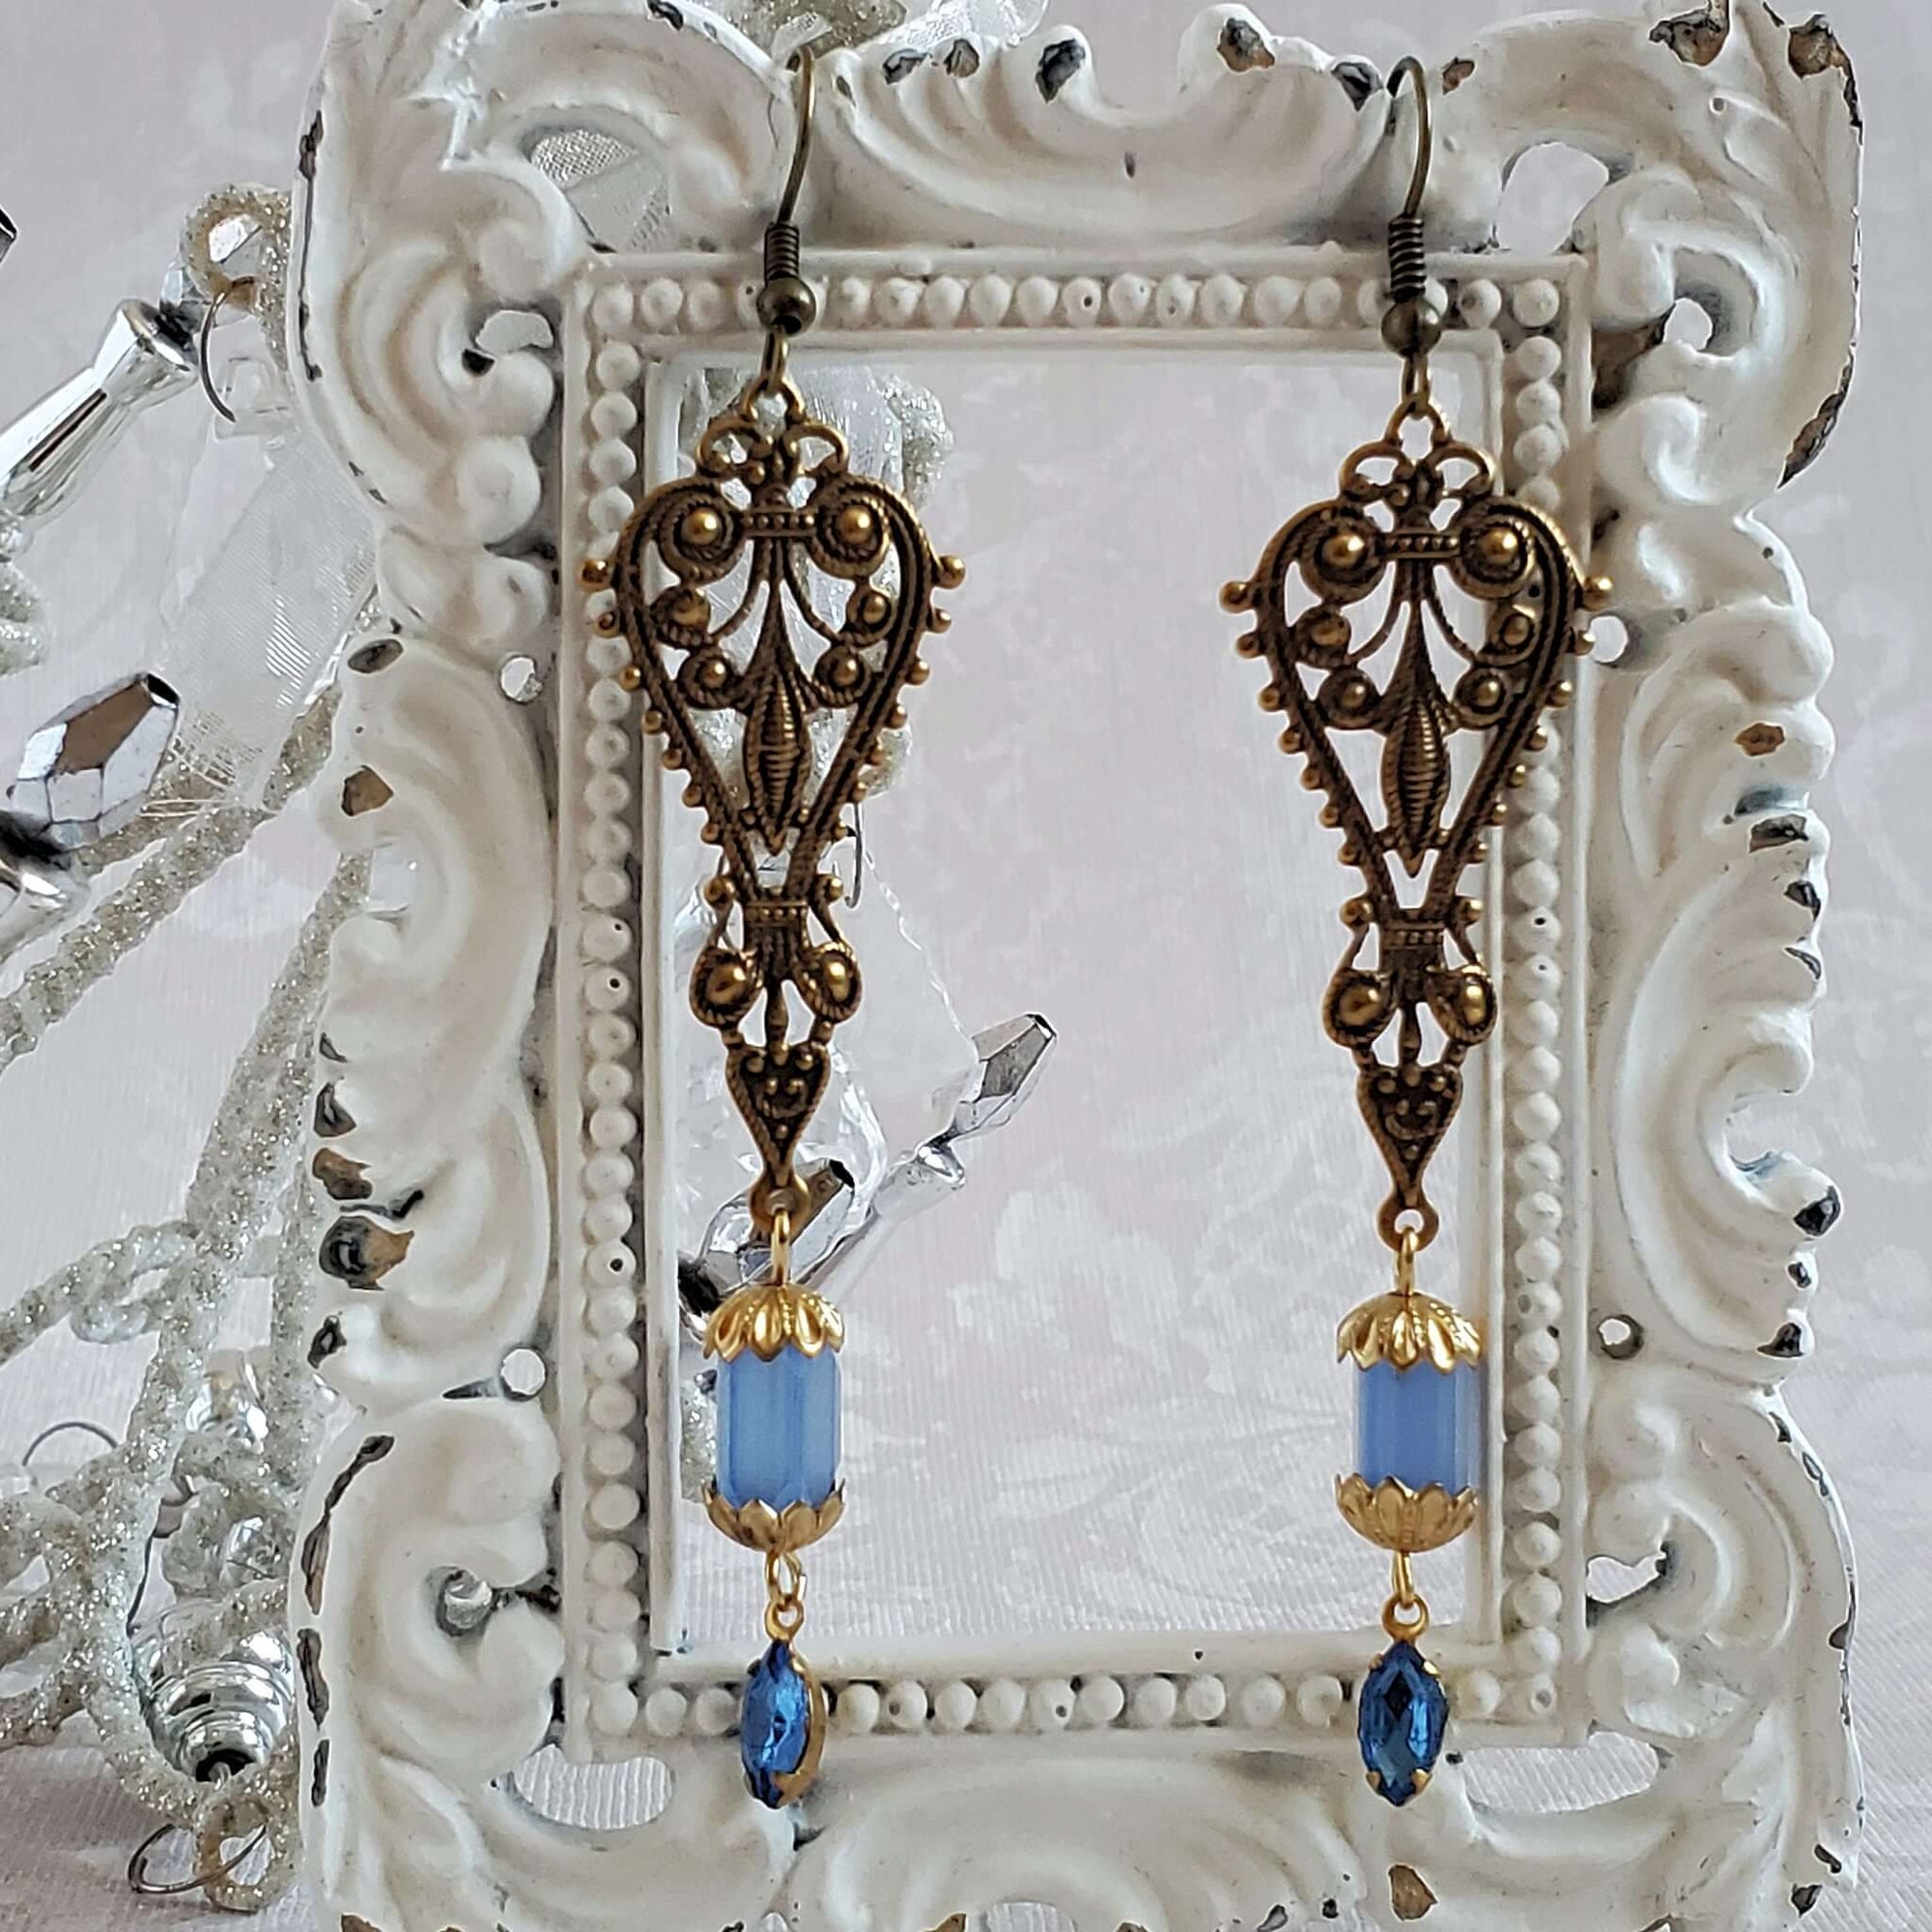 Victorian Inspired Filigree Earrings with Blue Glass Bead and Gemstone Drop